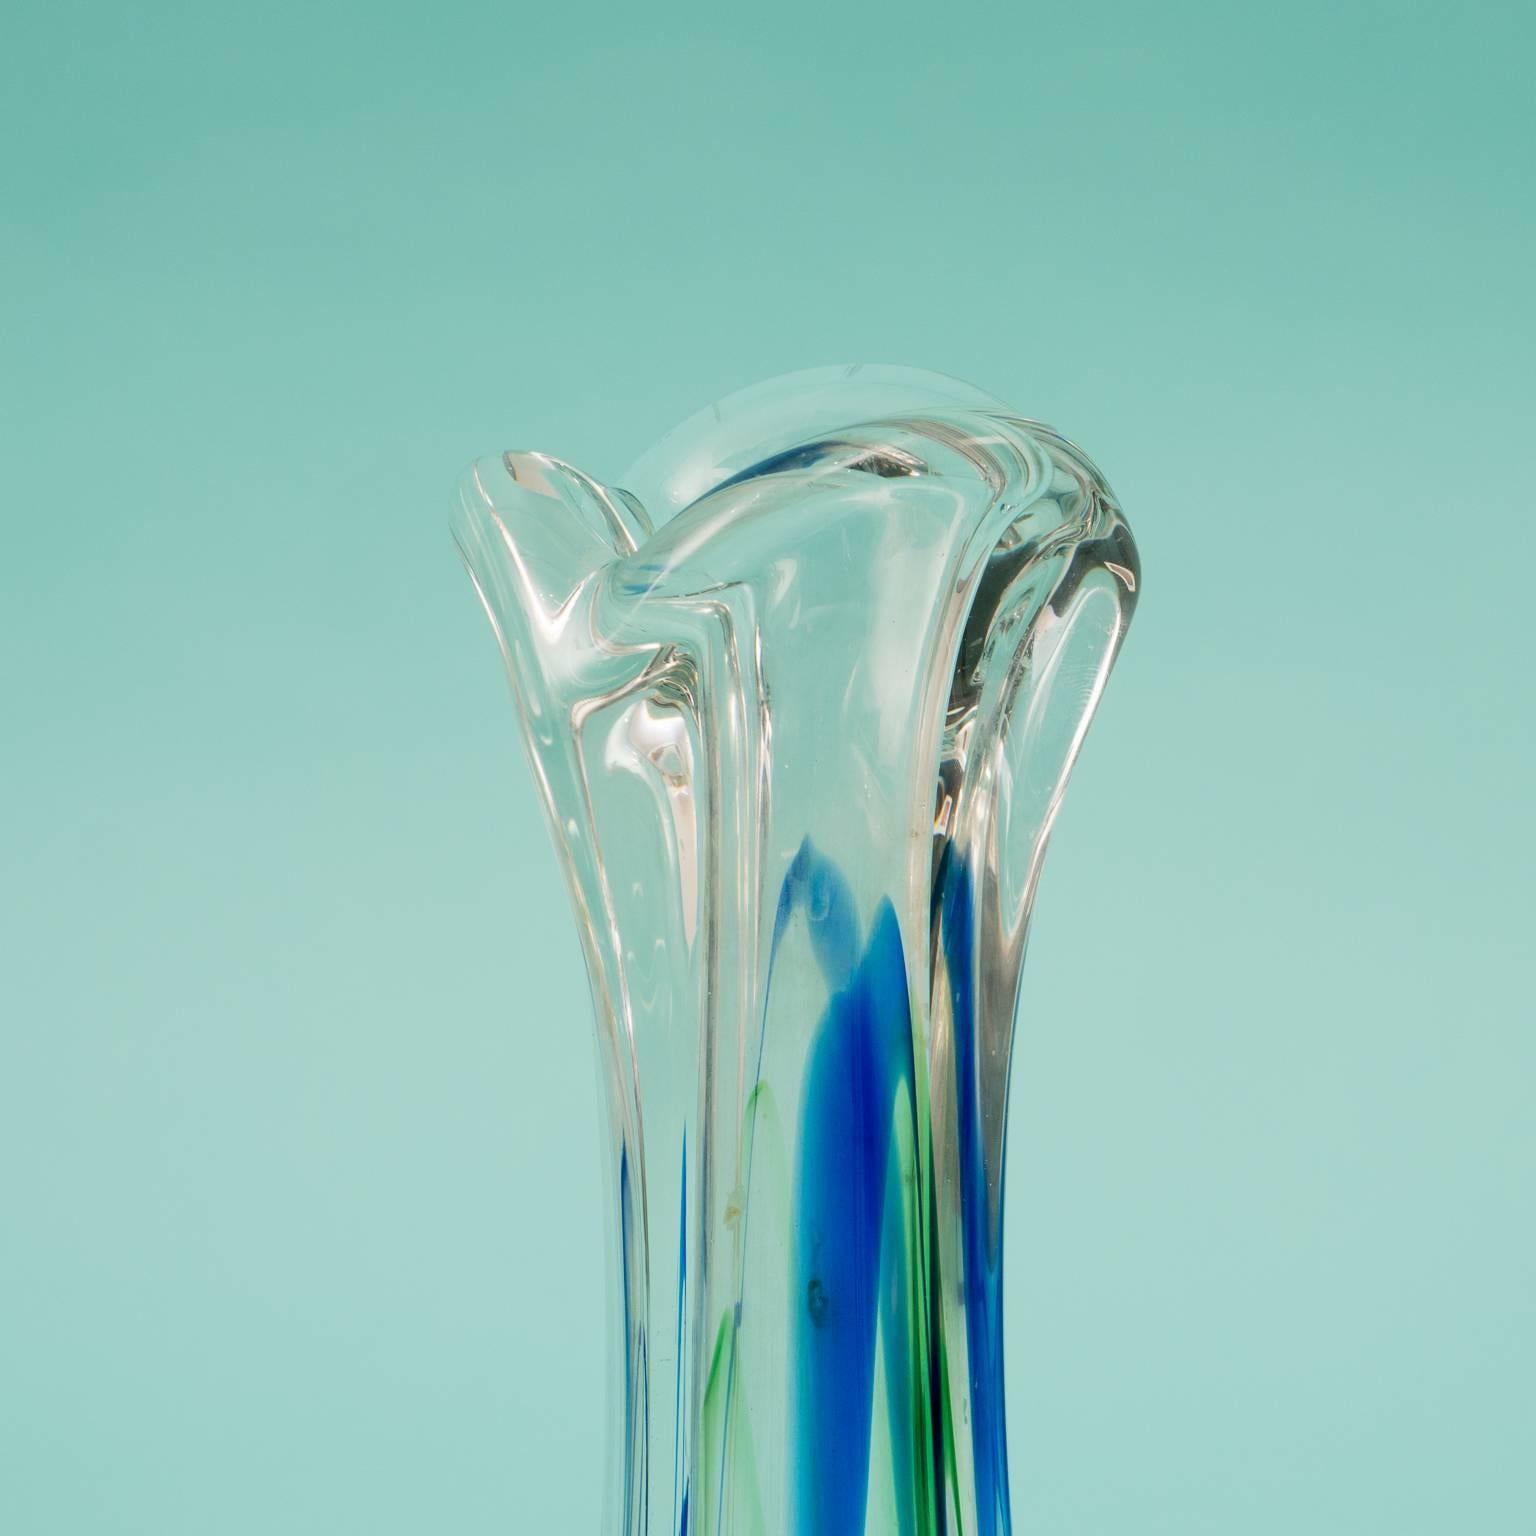 Bicolored 1960s Glass Vase by Kristalunie Maastricht In Excellent Condition For Sale In Karlsruhe, DE